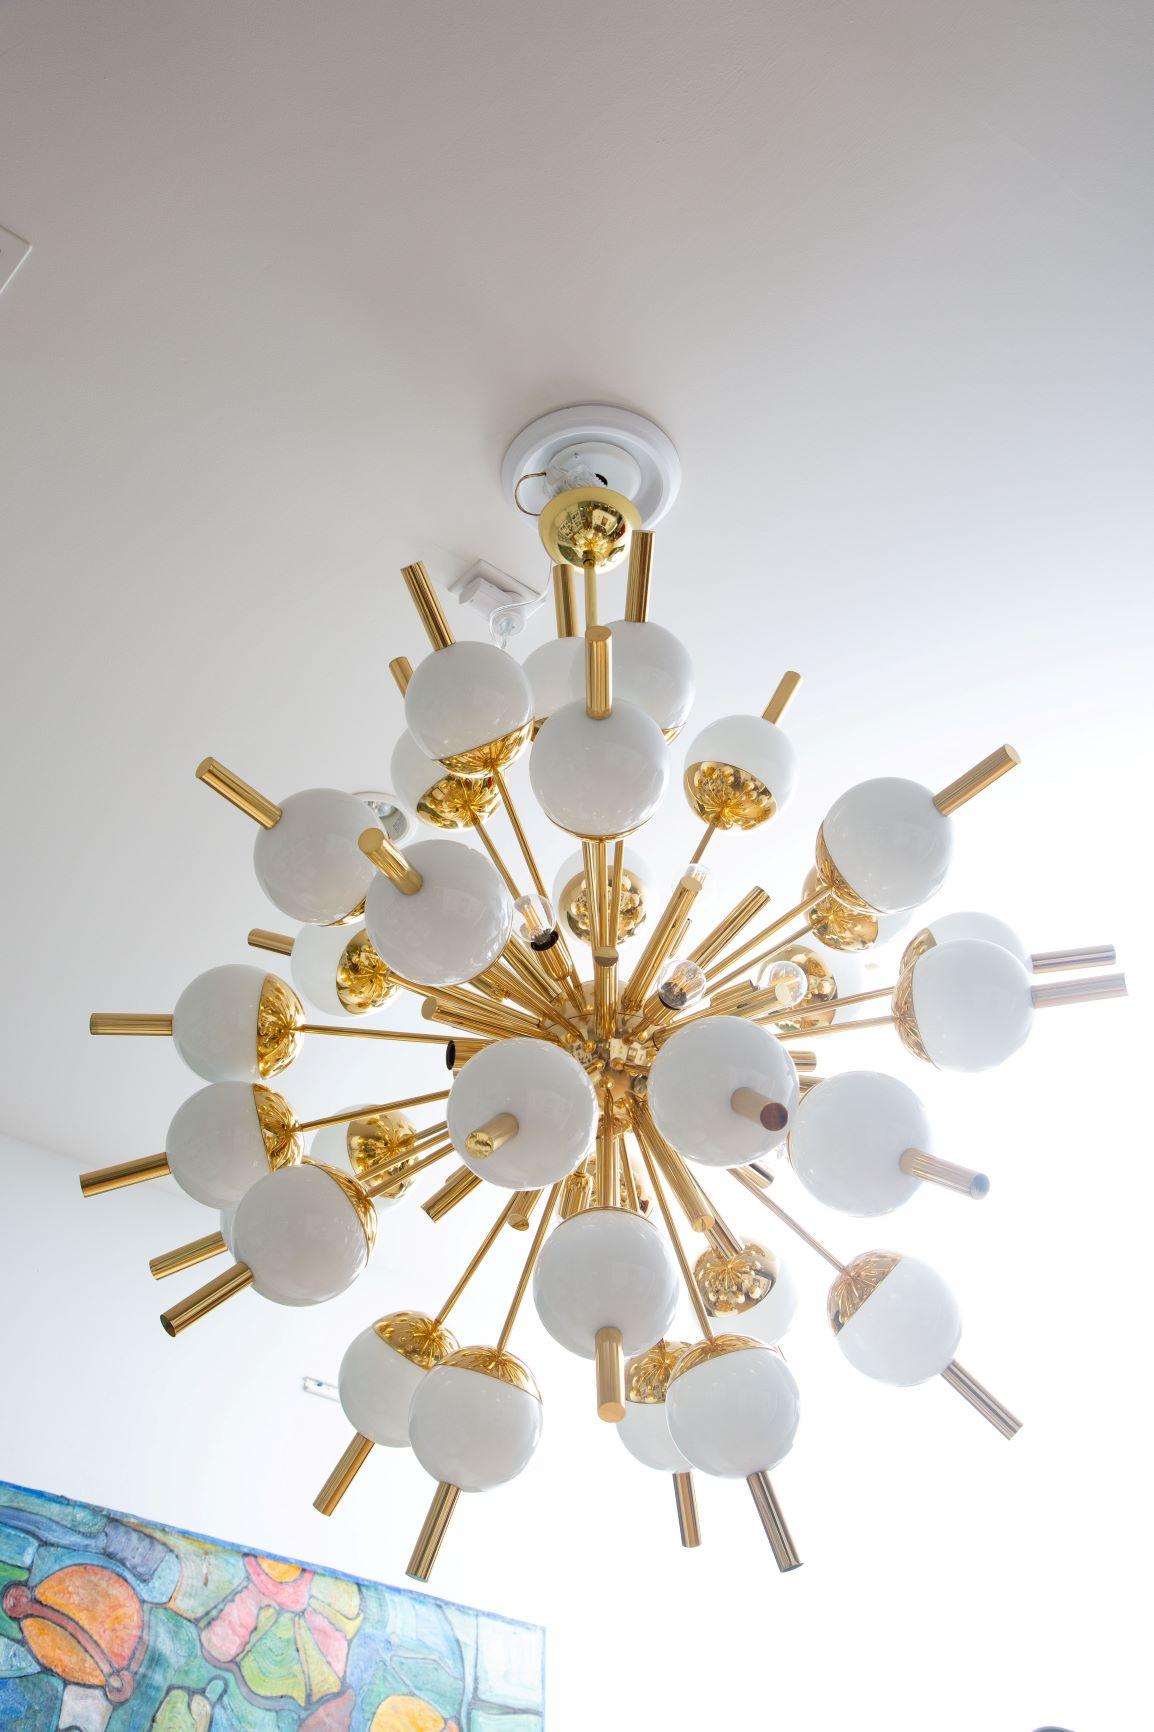 Contemporary Italian sputnik ceiling light in polished brass and opaline glass
Features 30 white opaline round shape globes
10 exposed brass cup sockets
Stunning design from all angles
Available to view in situ at our showroom in Miami.
Fixture